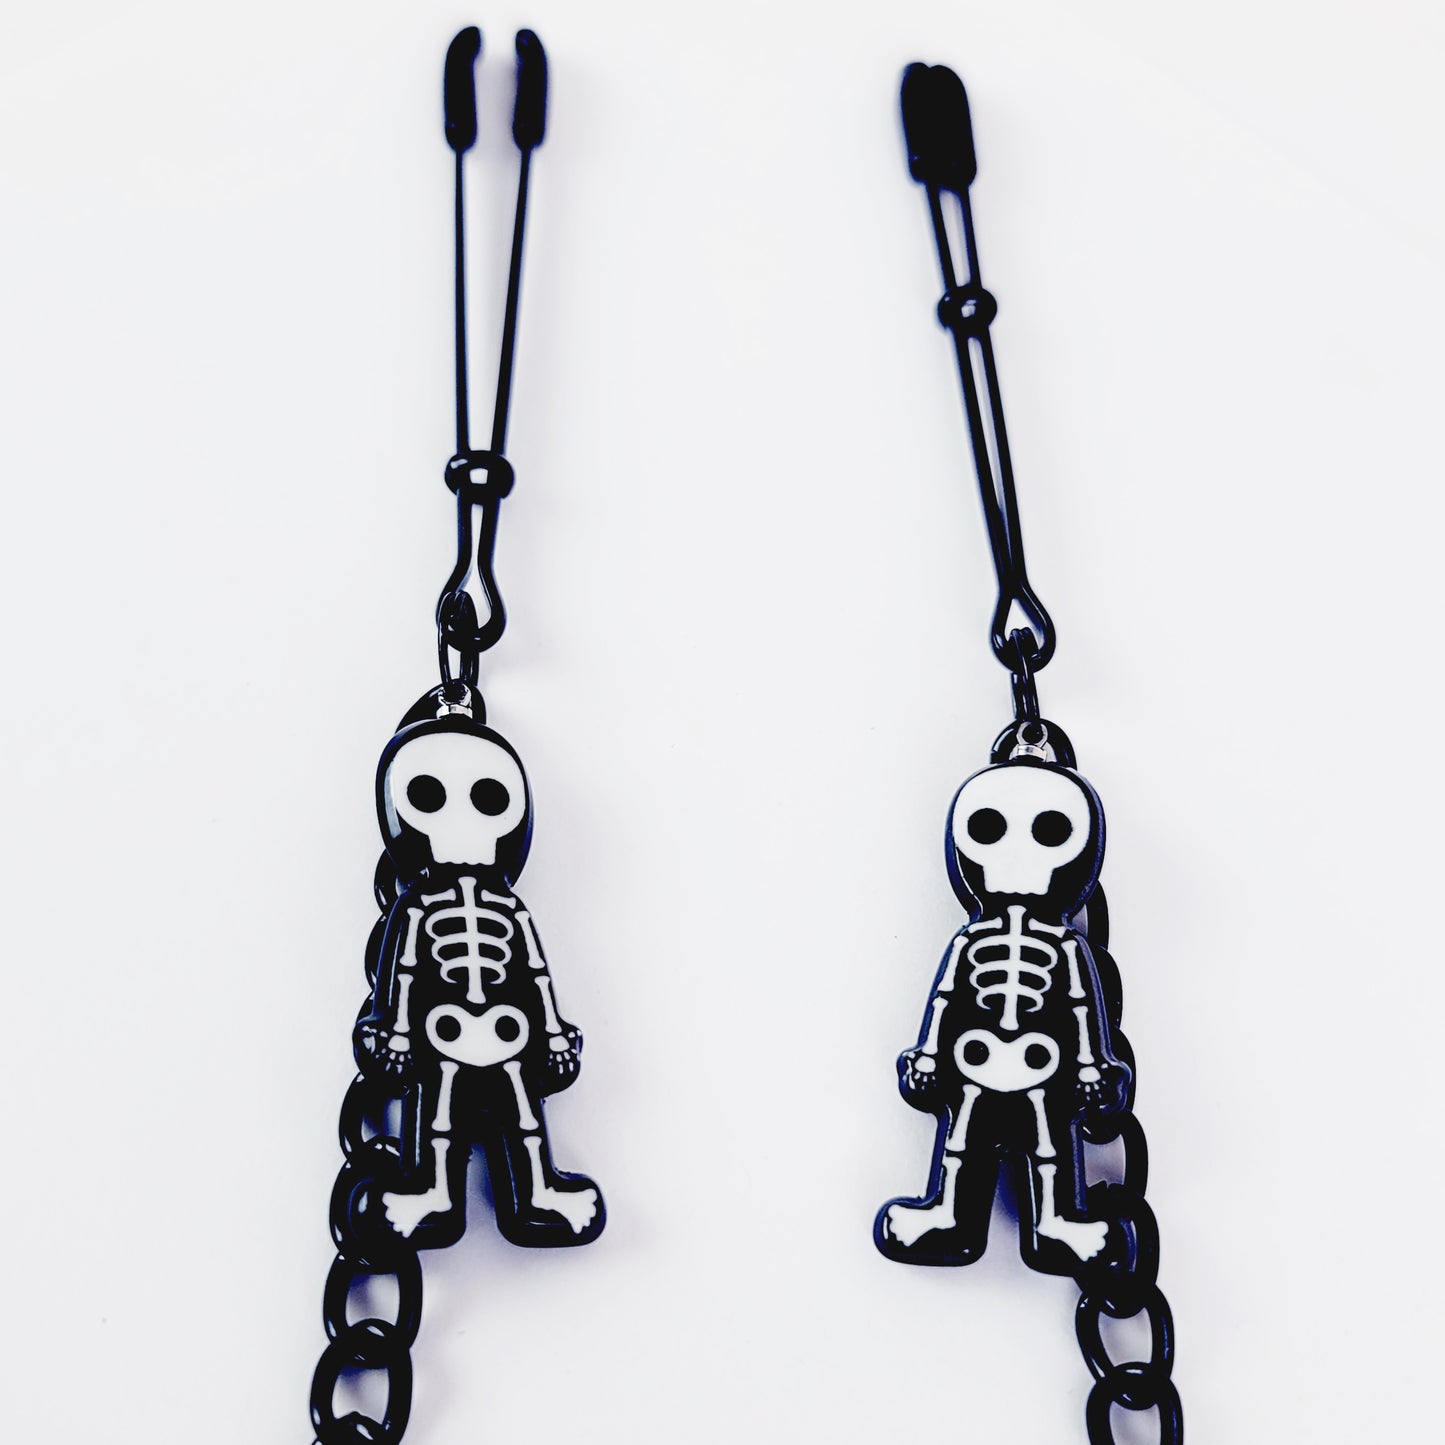 Nipple Clamps with Skeletons. Black Tweezer Clamps attached with Black Chain. Adult Toy for Nipple Play. Halloween, BDSM, MATURE